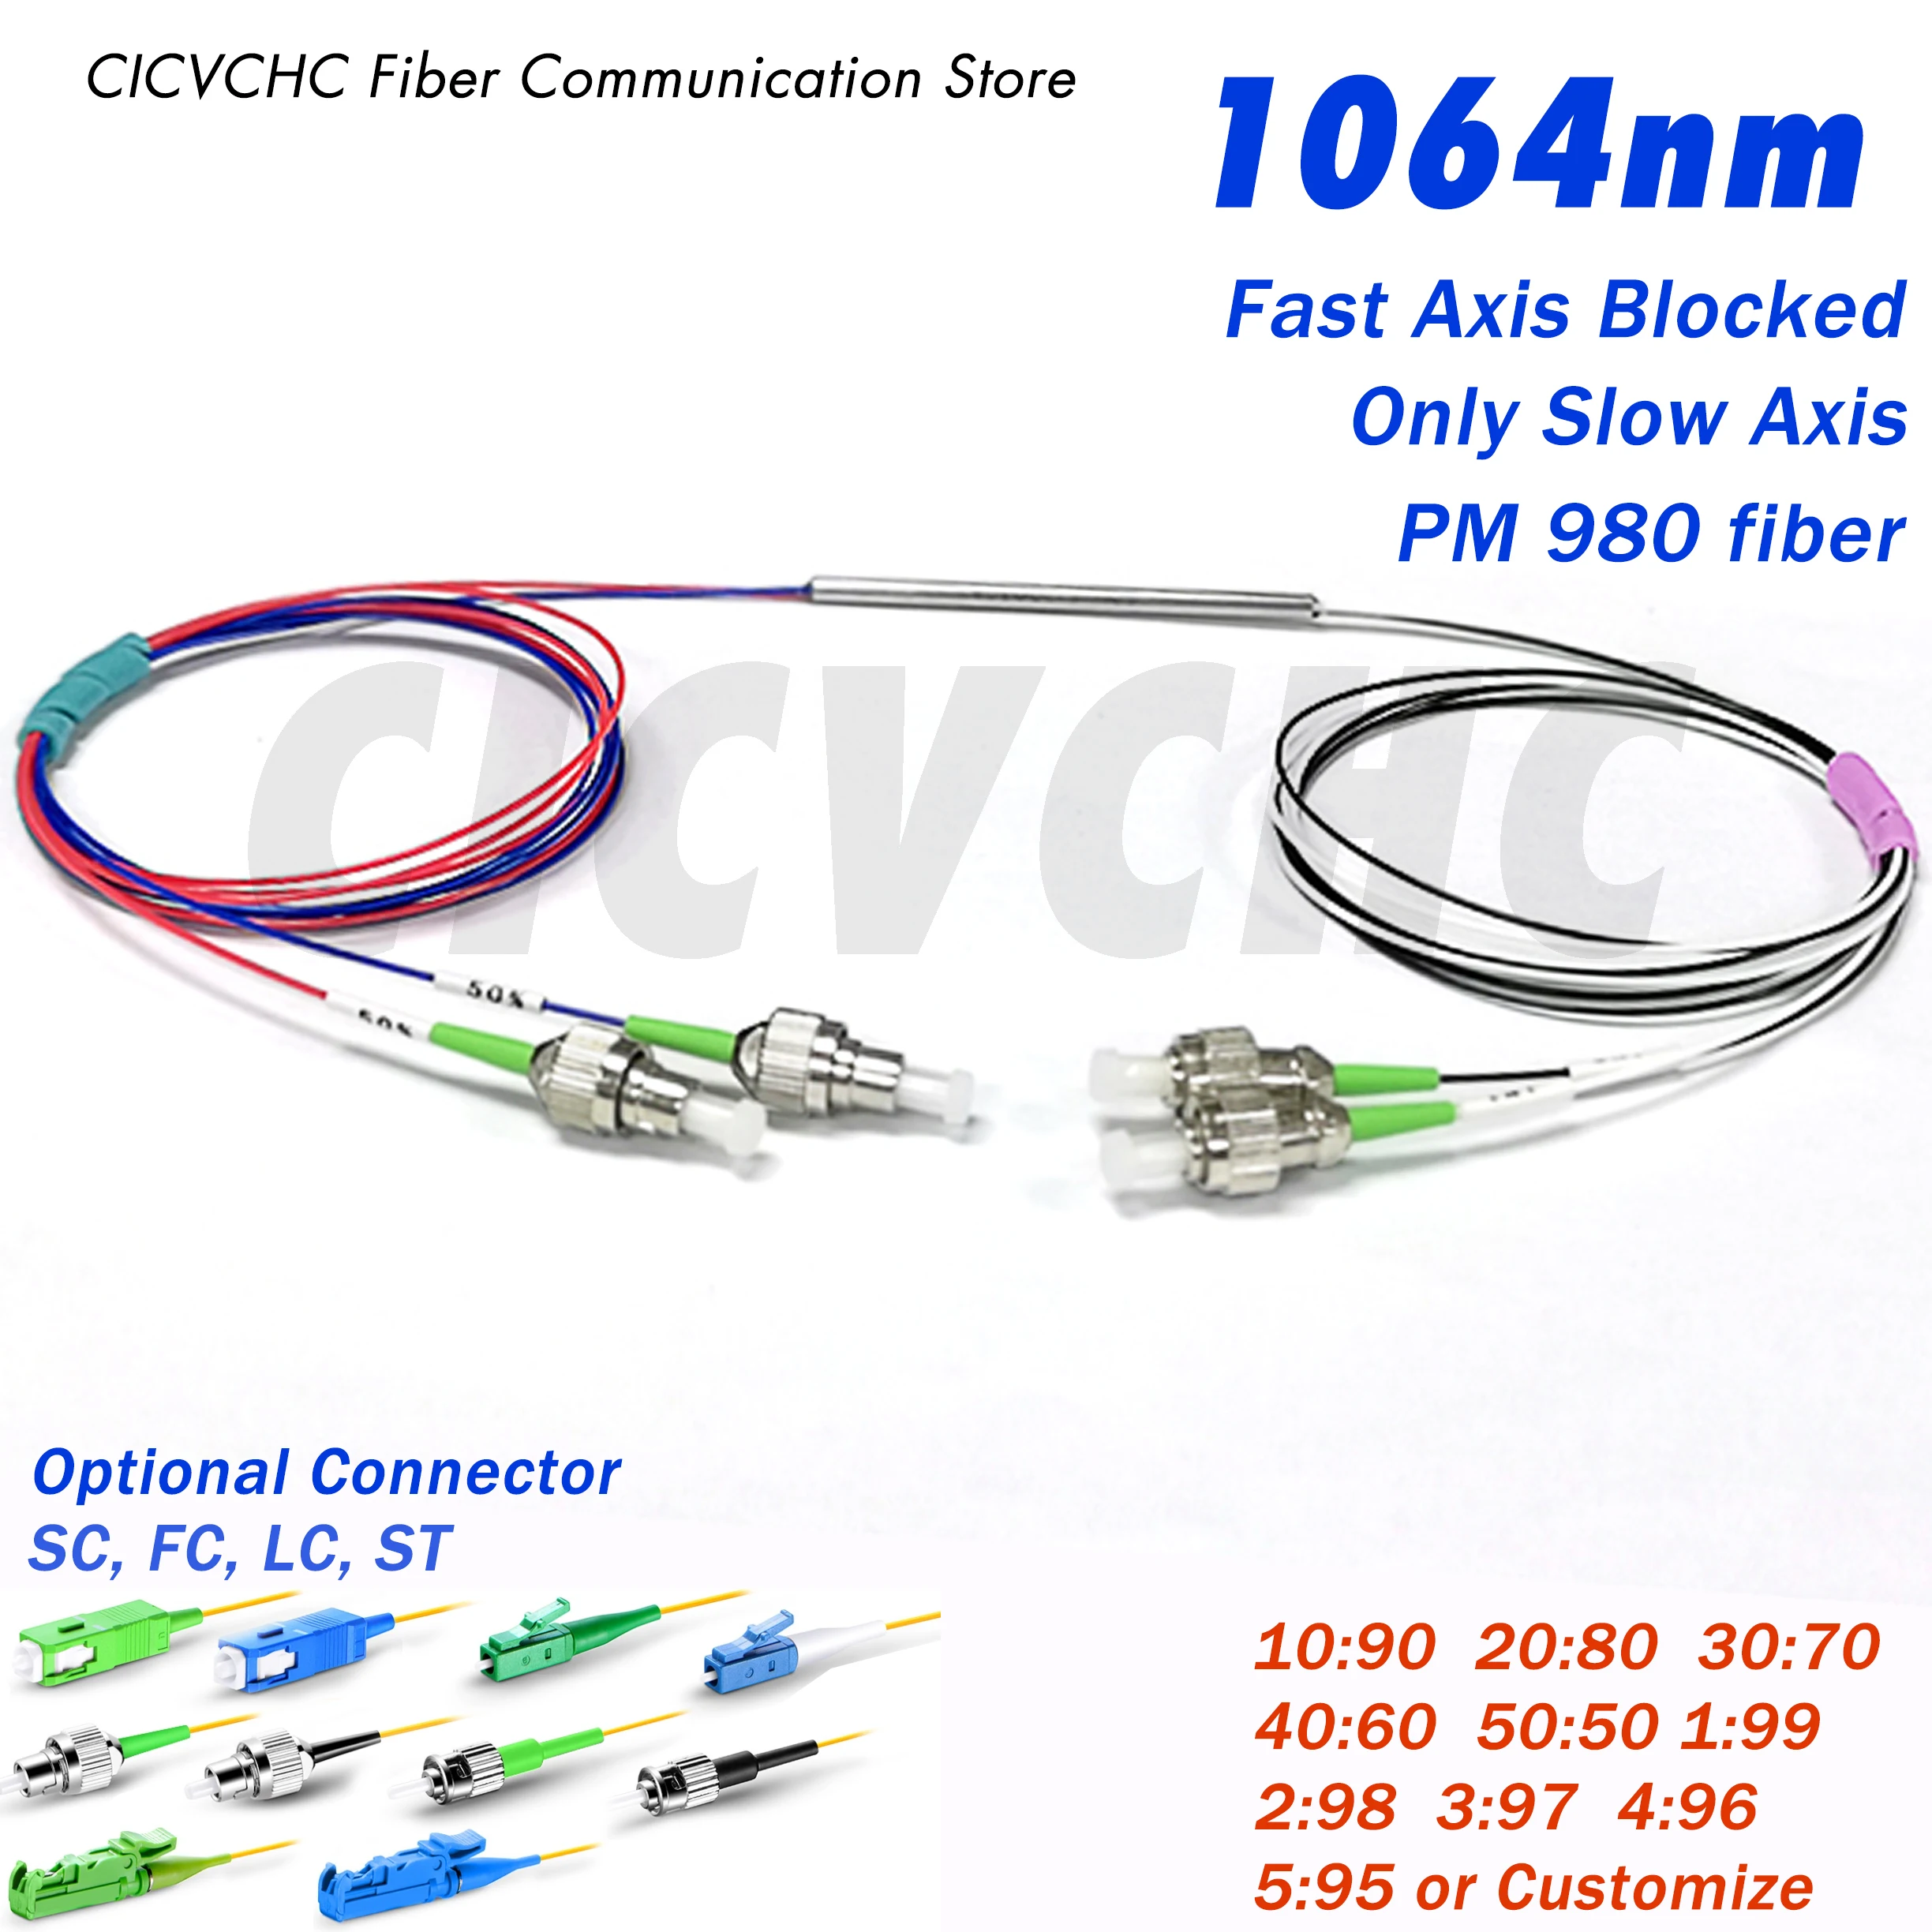 PM 2x2 Coupler 1064nm, Fast Axis Blocked, only Slow Axis with PM980 fiber-SC, FC, LC, ST-0.9mm loose tube